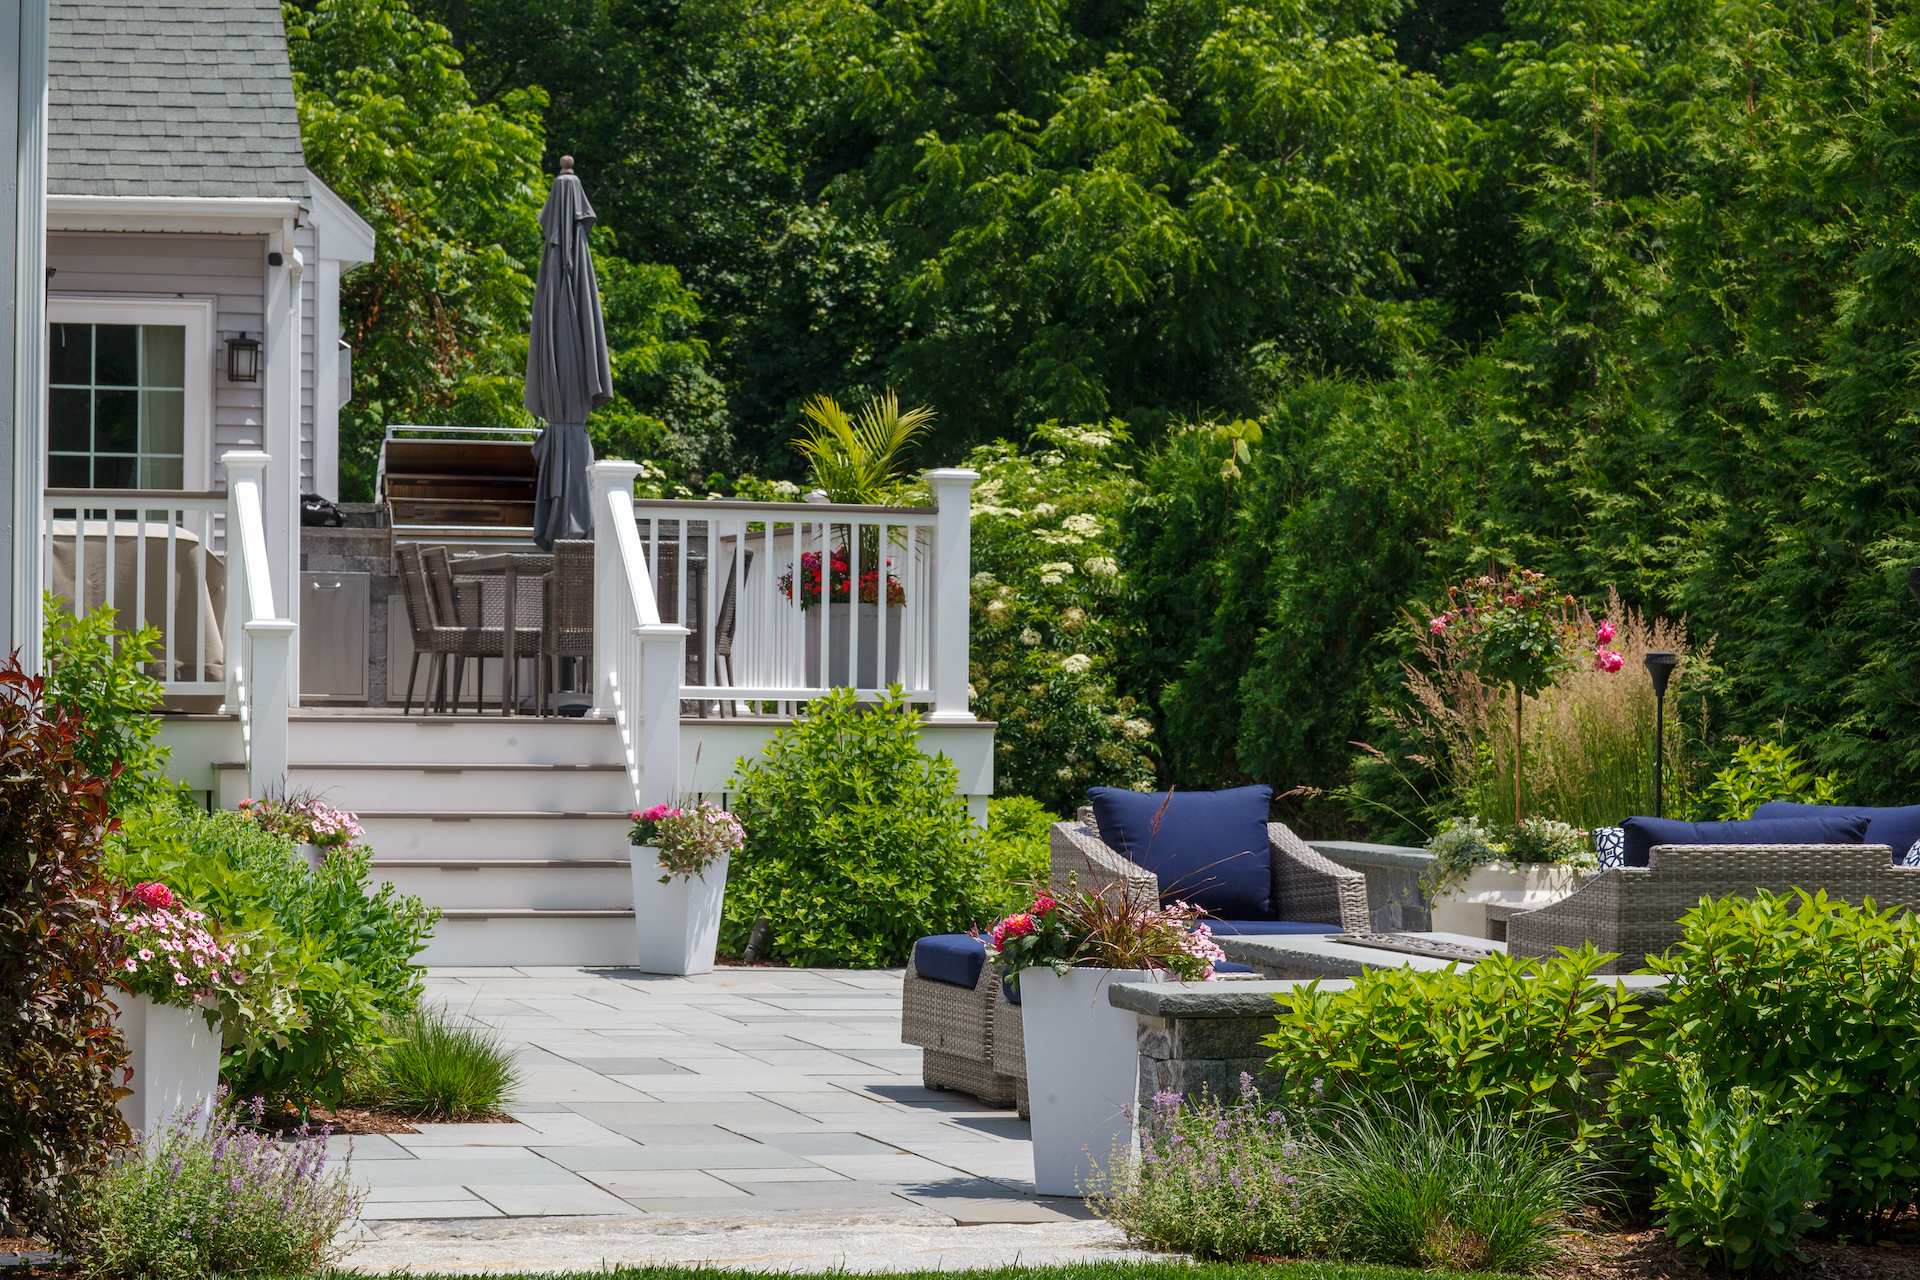 Landscaping for Small Spaces: Making the Most of Limited Outdoor Areas